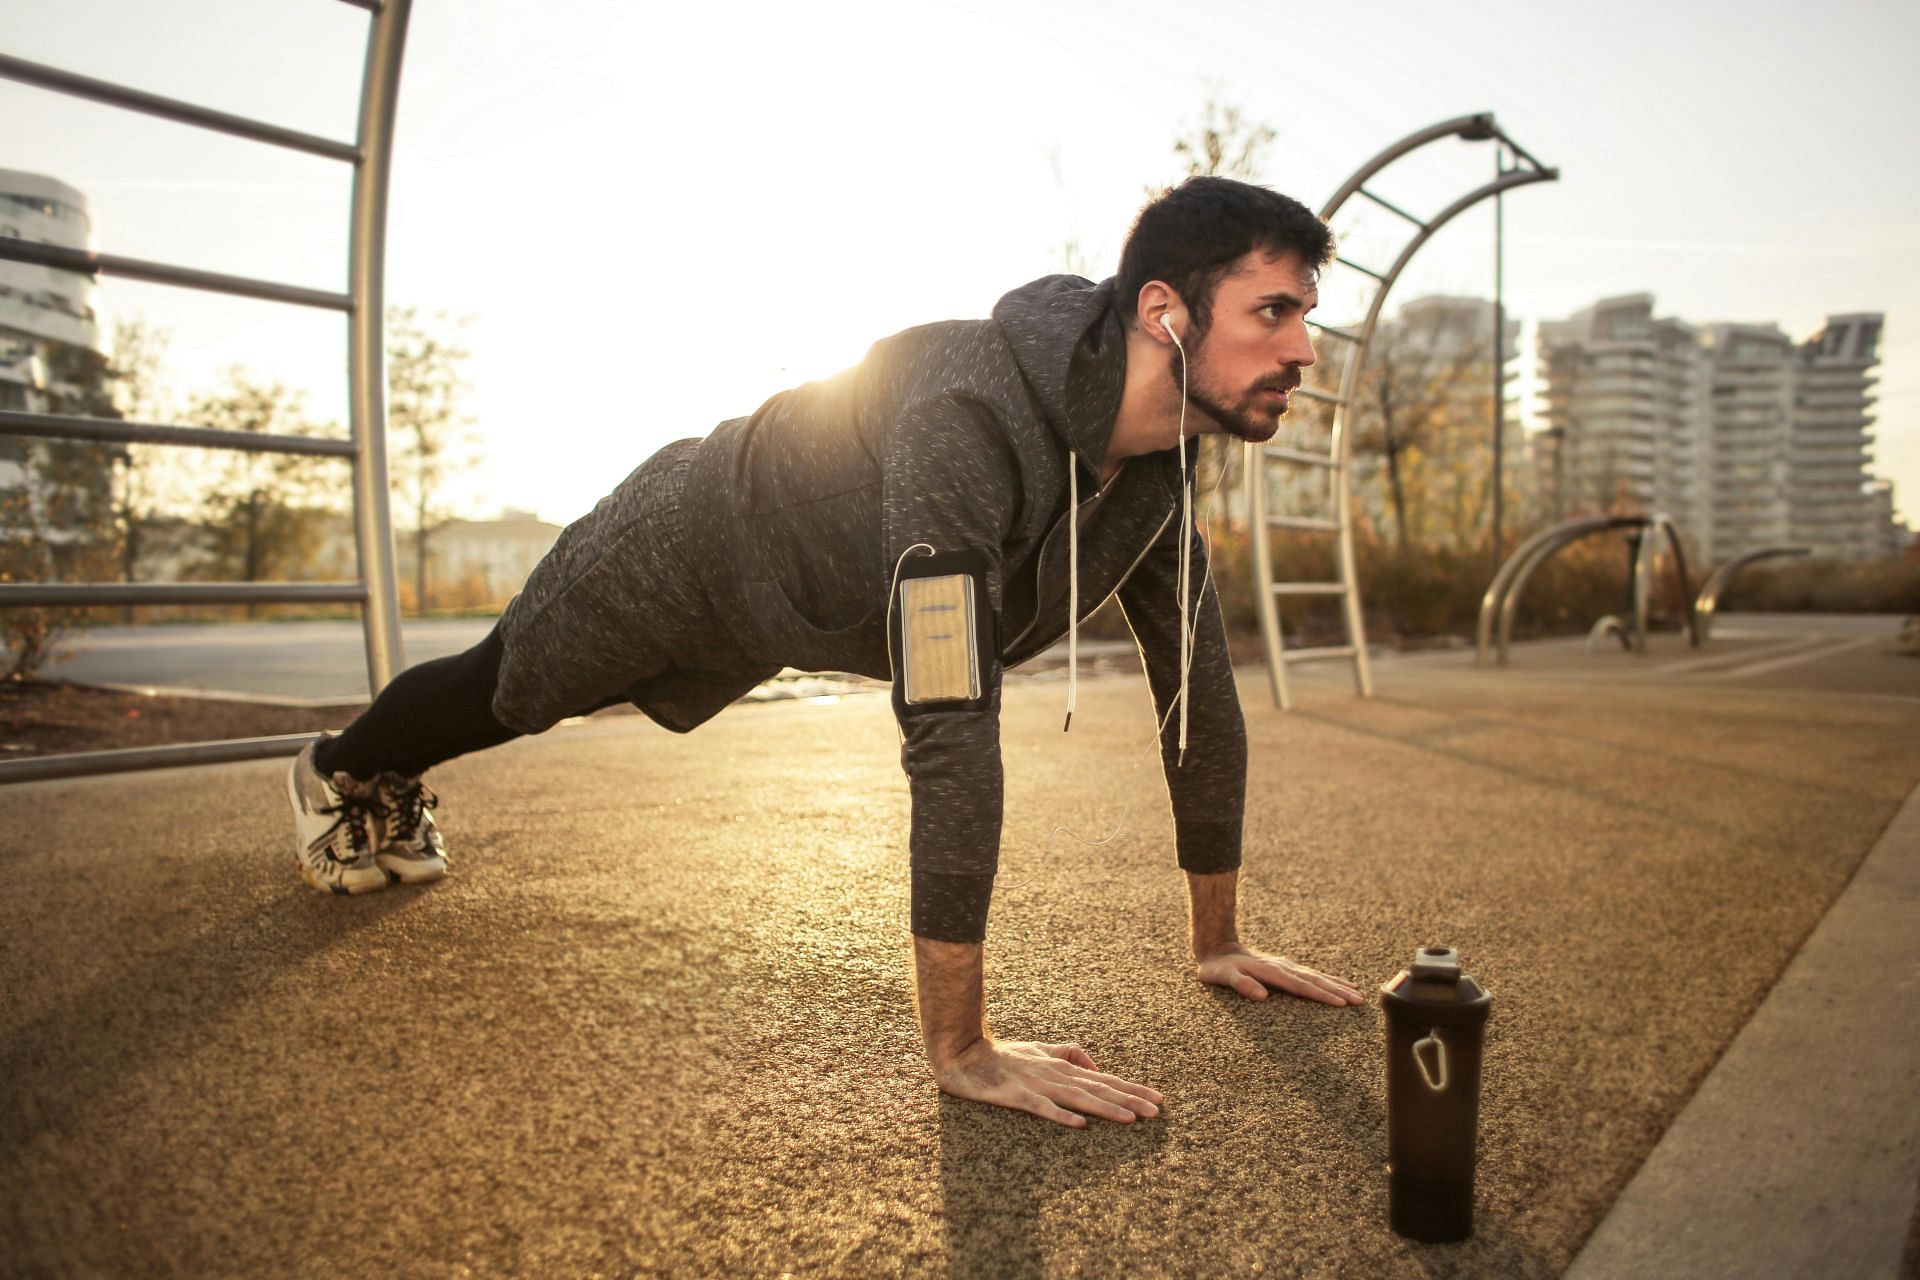 Push up drop set workout finishers (image sourced via Pexels / Photo by andrea)